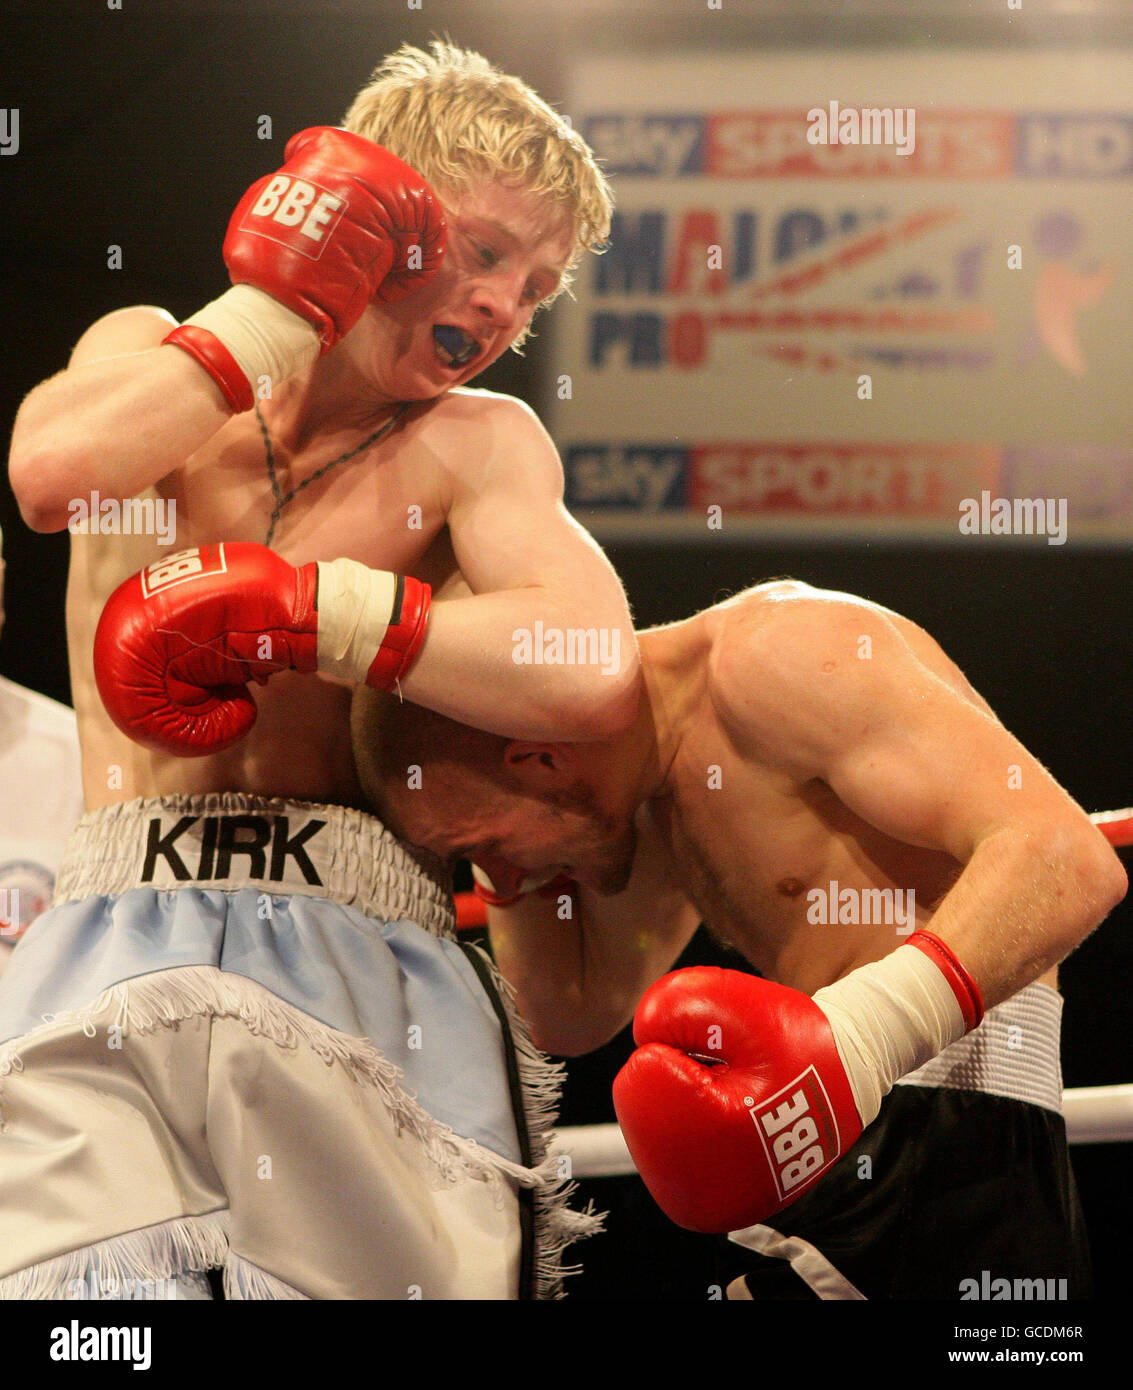 Boxing - Super Featherweight Bout - Kirk Goodings v Pavels Senkovs - Indoor Sports Centre. Kirk Goodings (right) on his way to beating Pavels Senkovs during the super featherweight bout at the Indoor Sports Centre, Leigh. Stock Photo